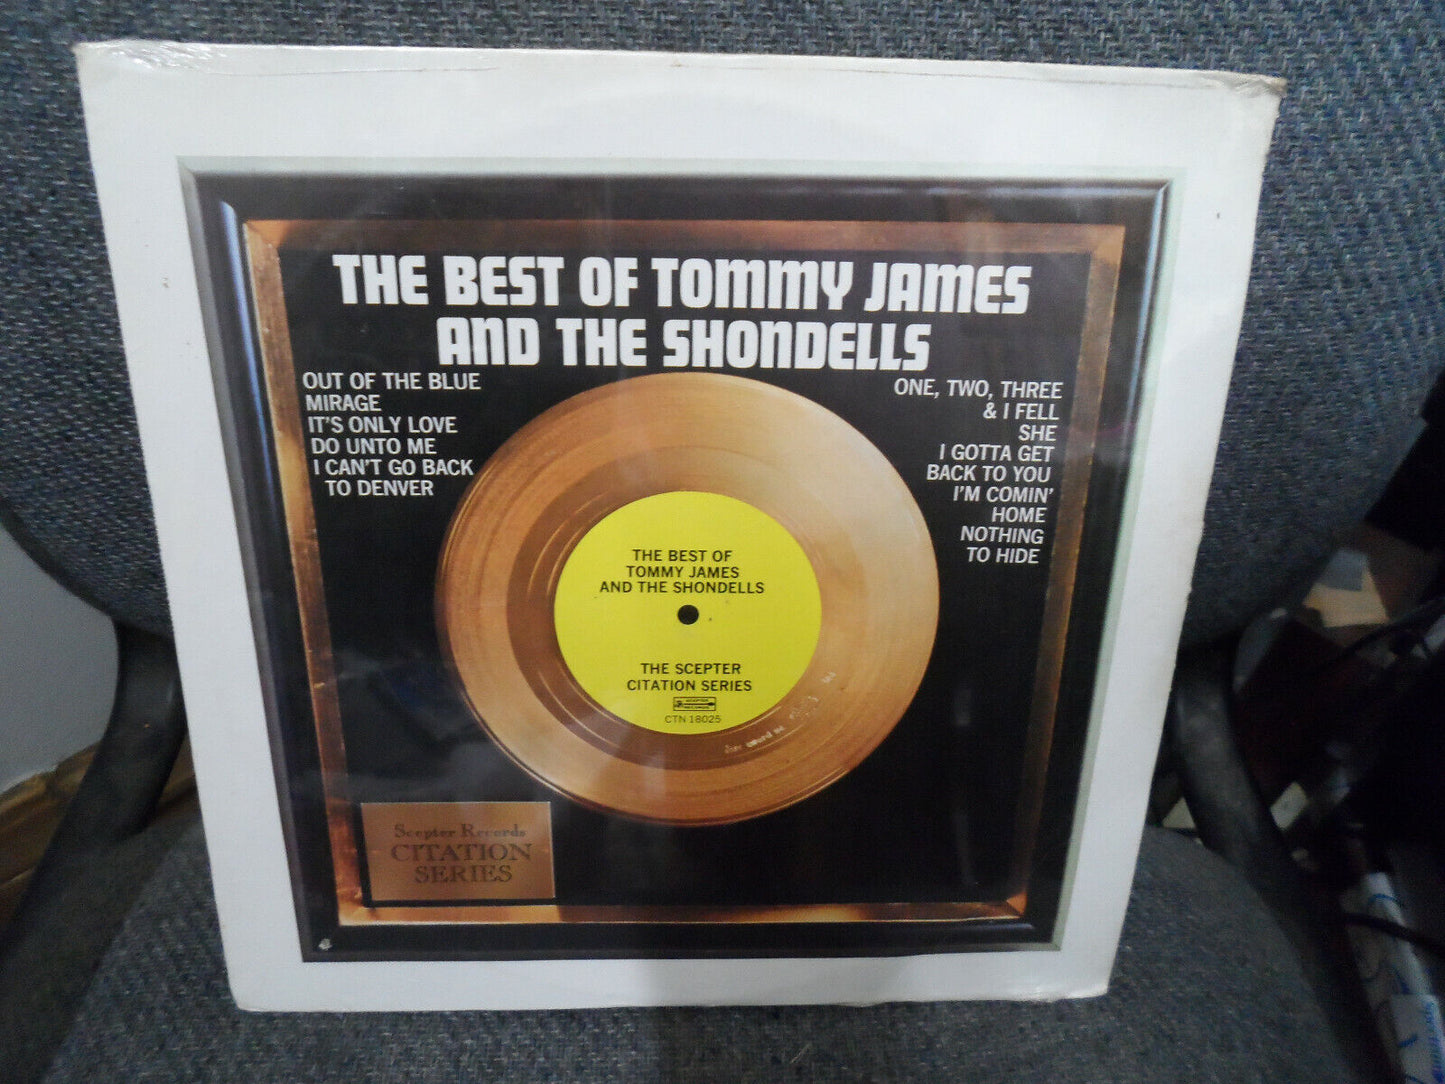 Factory Sealed - The Best Of Tommy James And The Shondells - SEALED MINT!